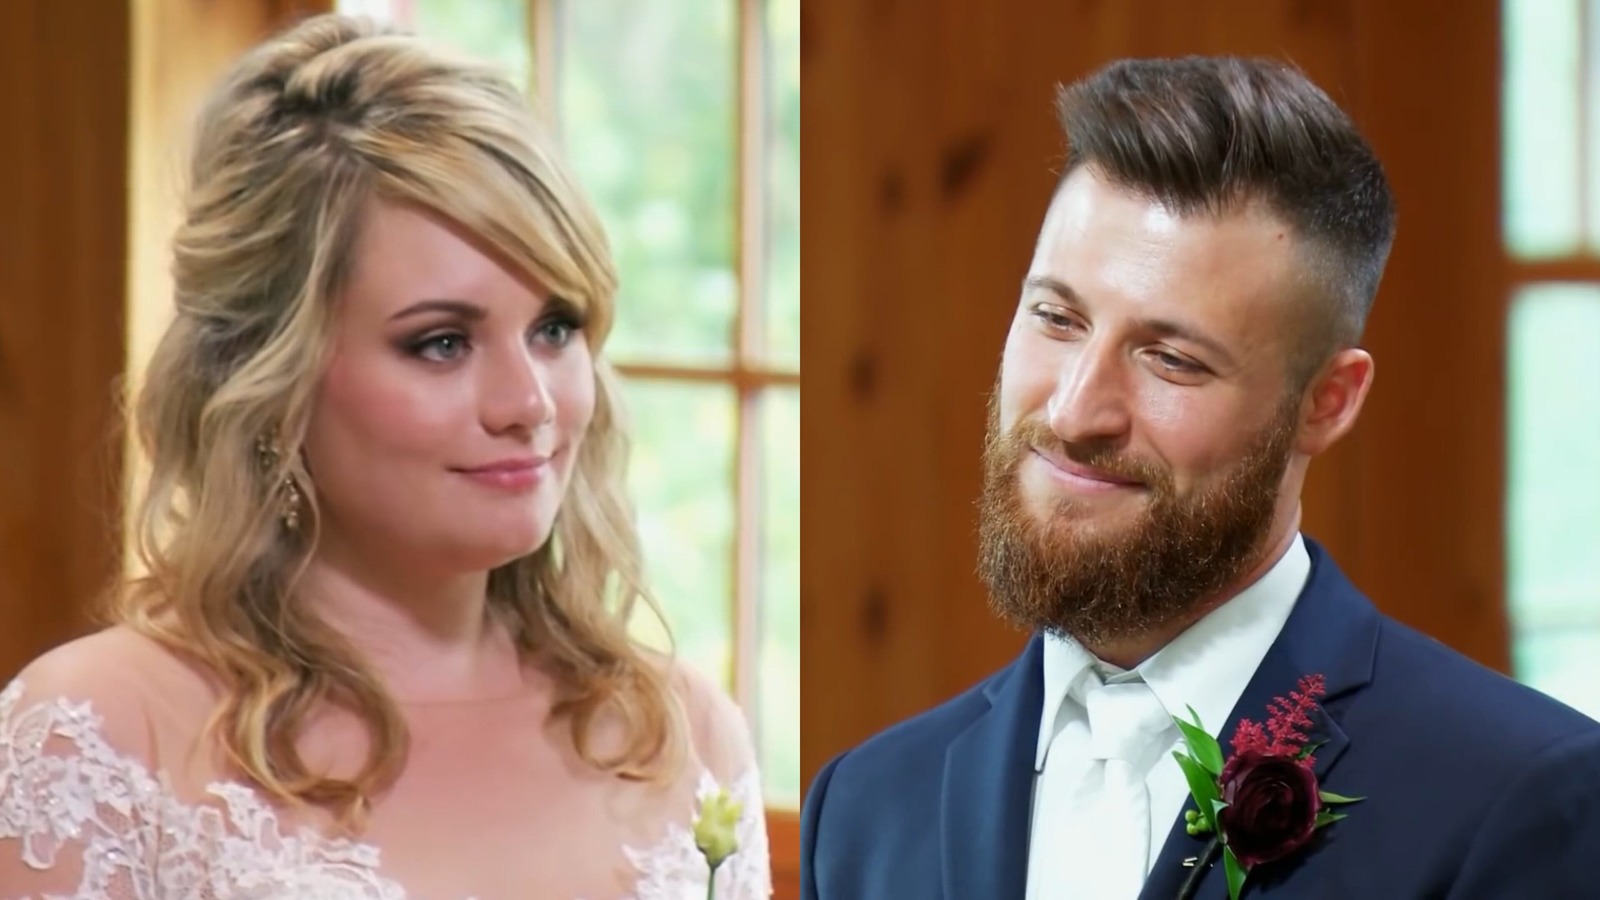 Married At First Sight The Real Reason Luke Cuccurullo And Kate Sisk Split